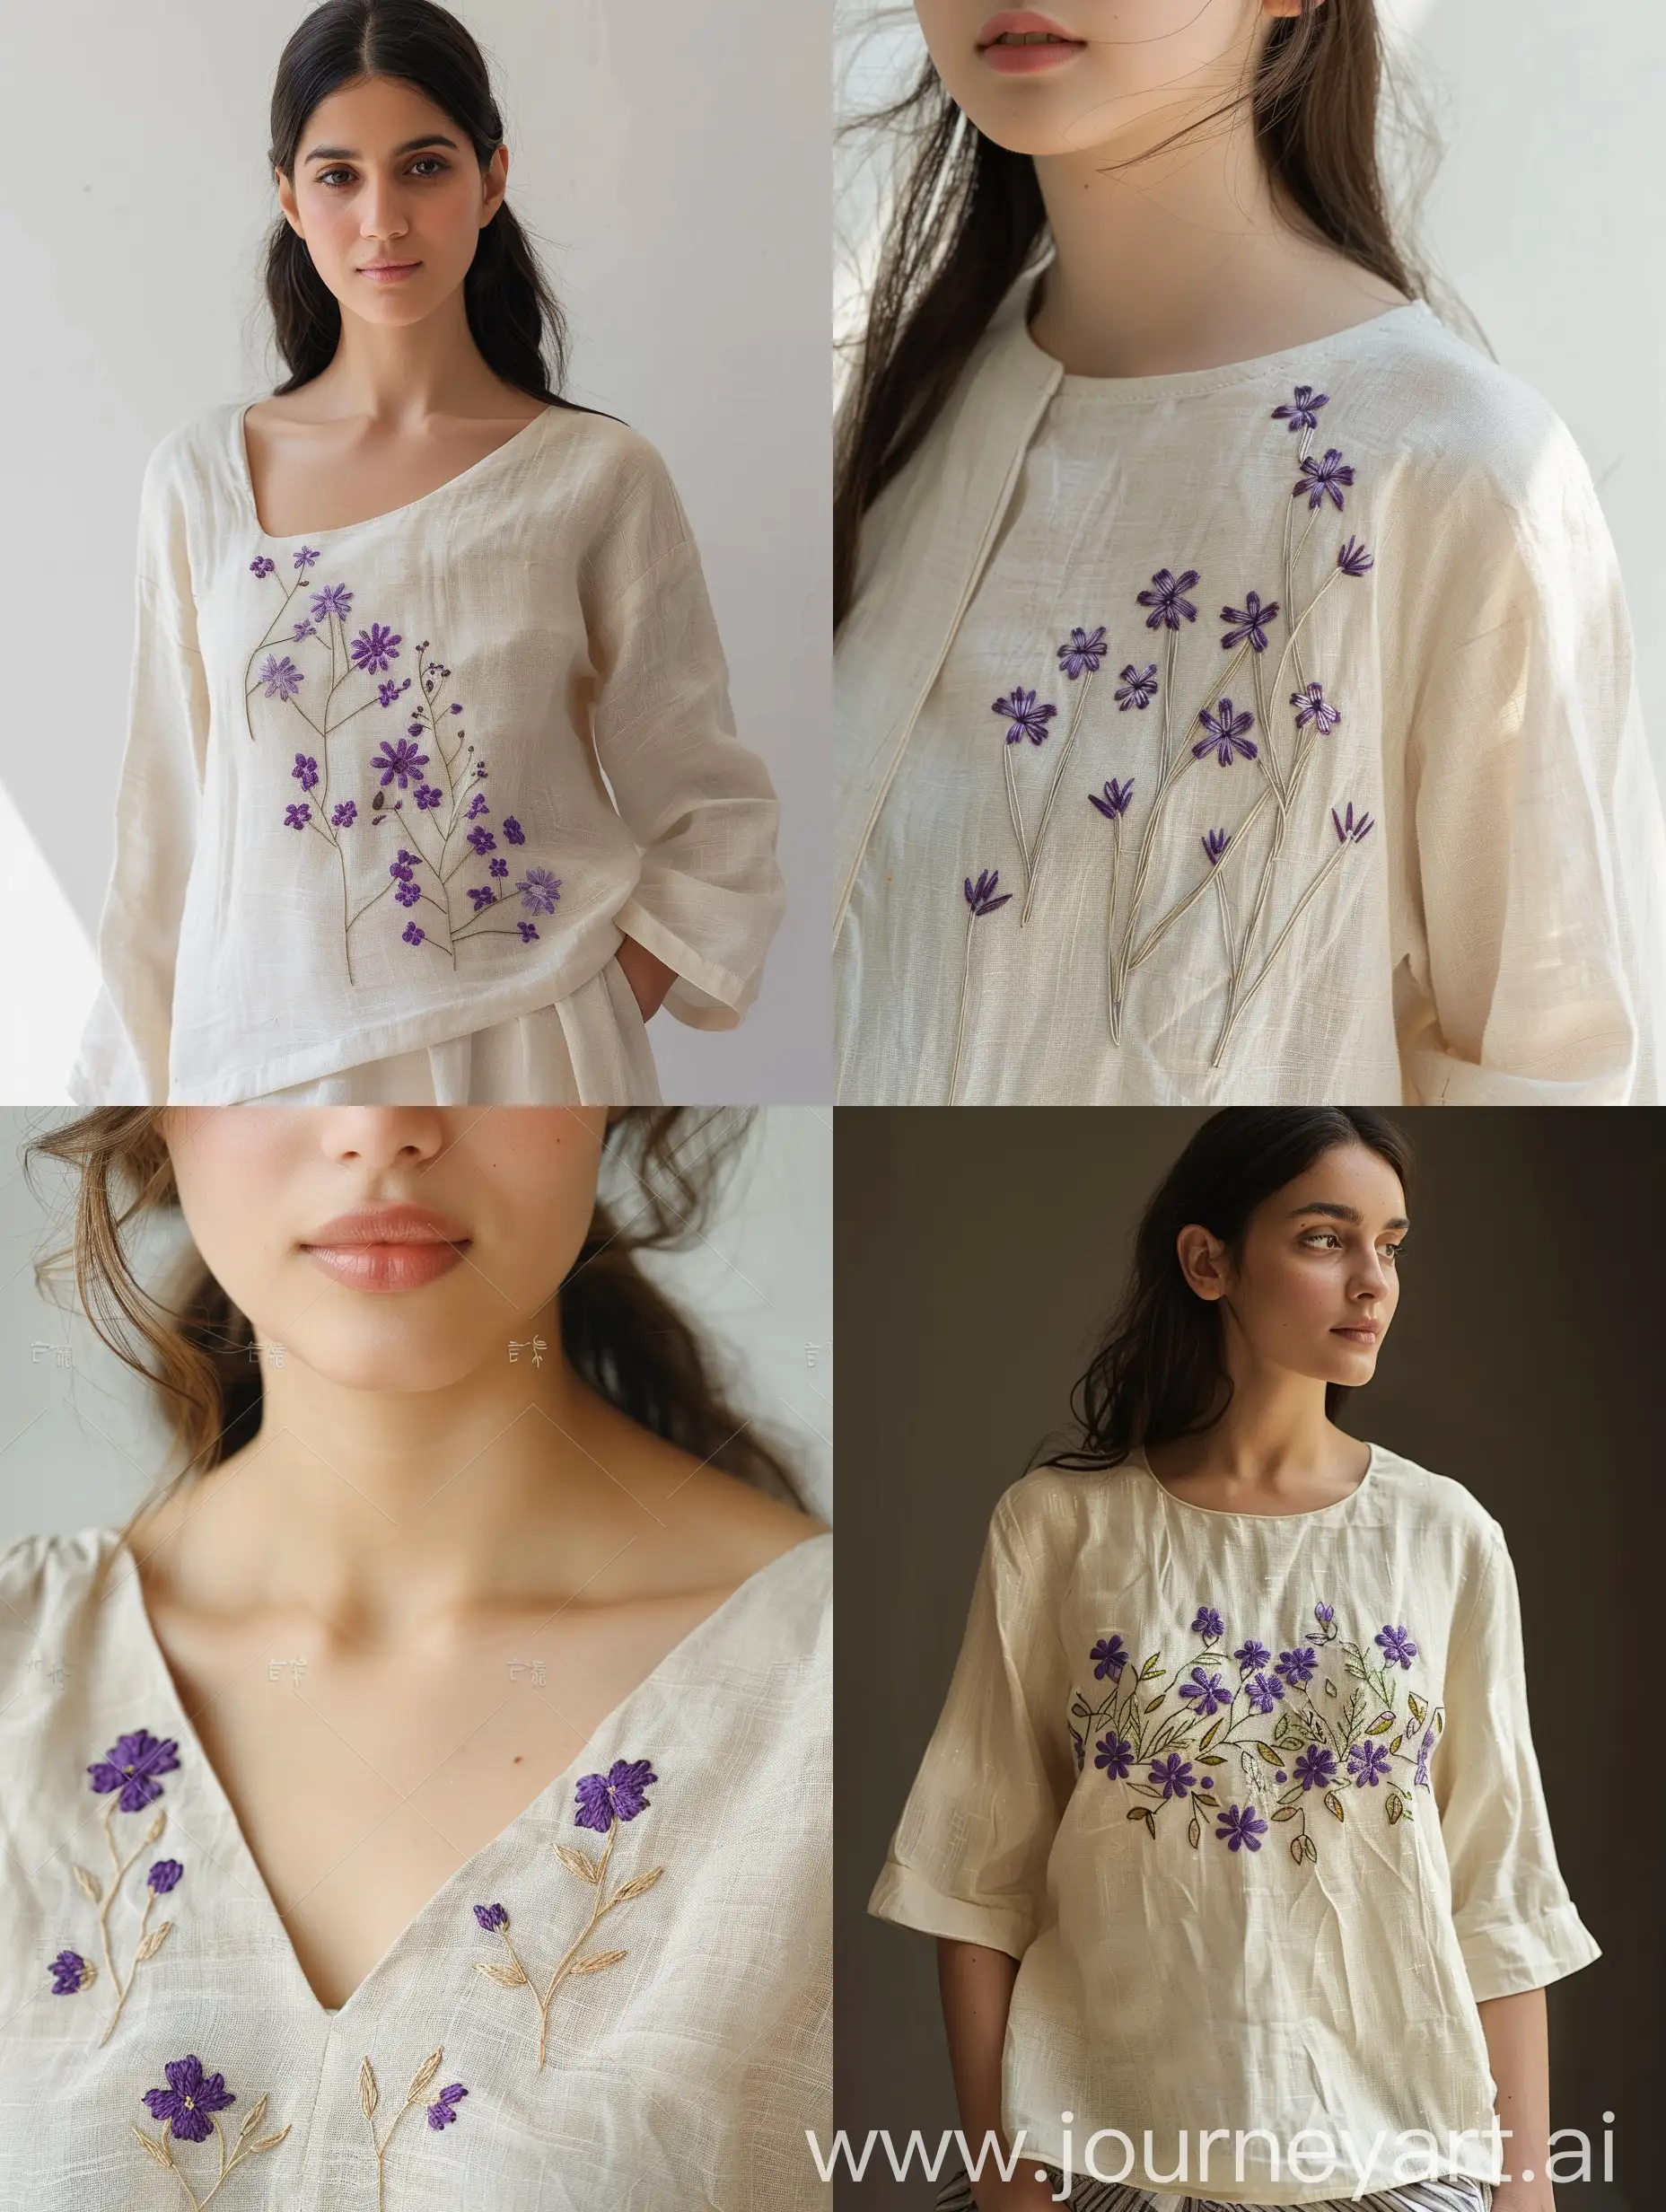 Women's blouse, with embroidery, cream color, linen material, handmade embroidery design of small purple flowers, with small and low embroidery on one side.